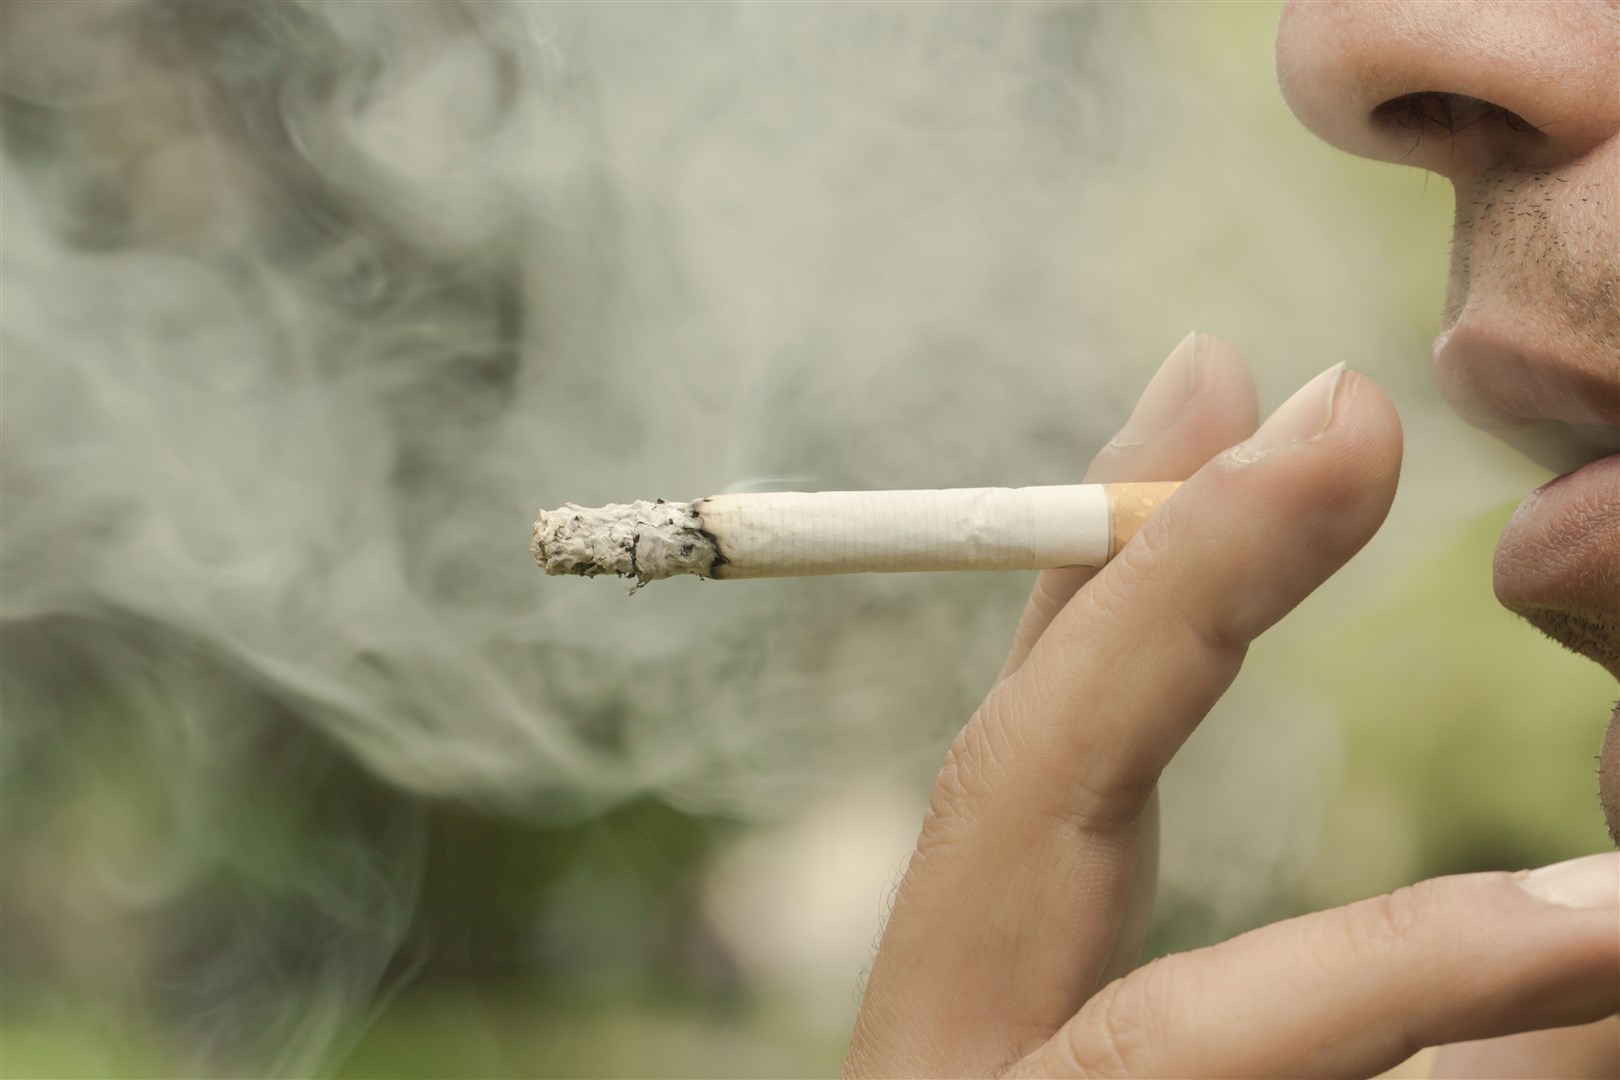 Changes are being made to smoking outside hospitals.